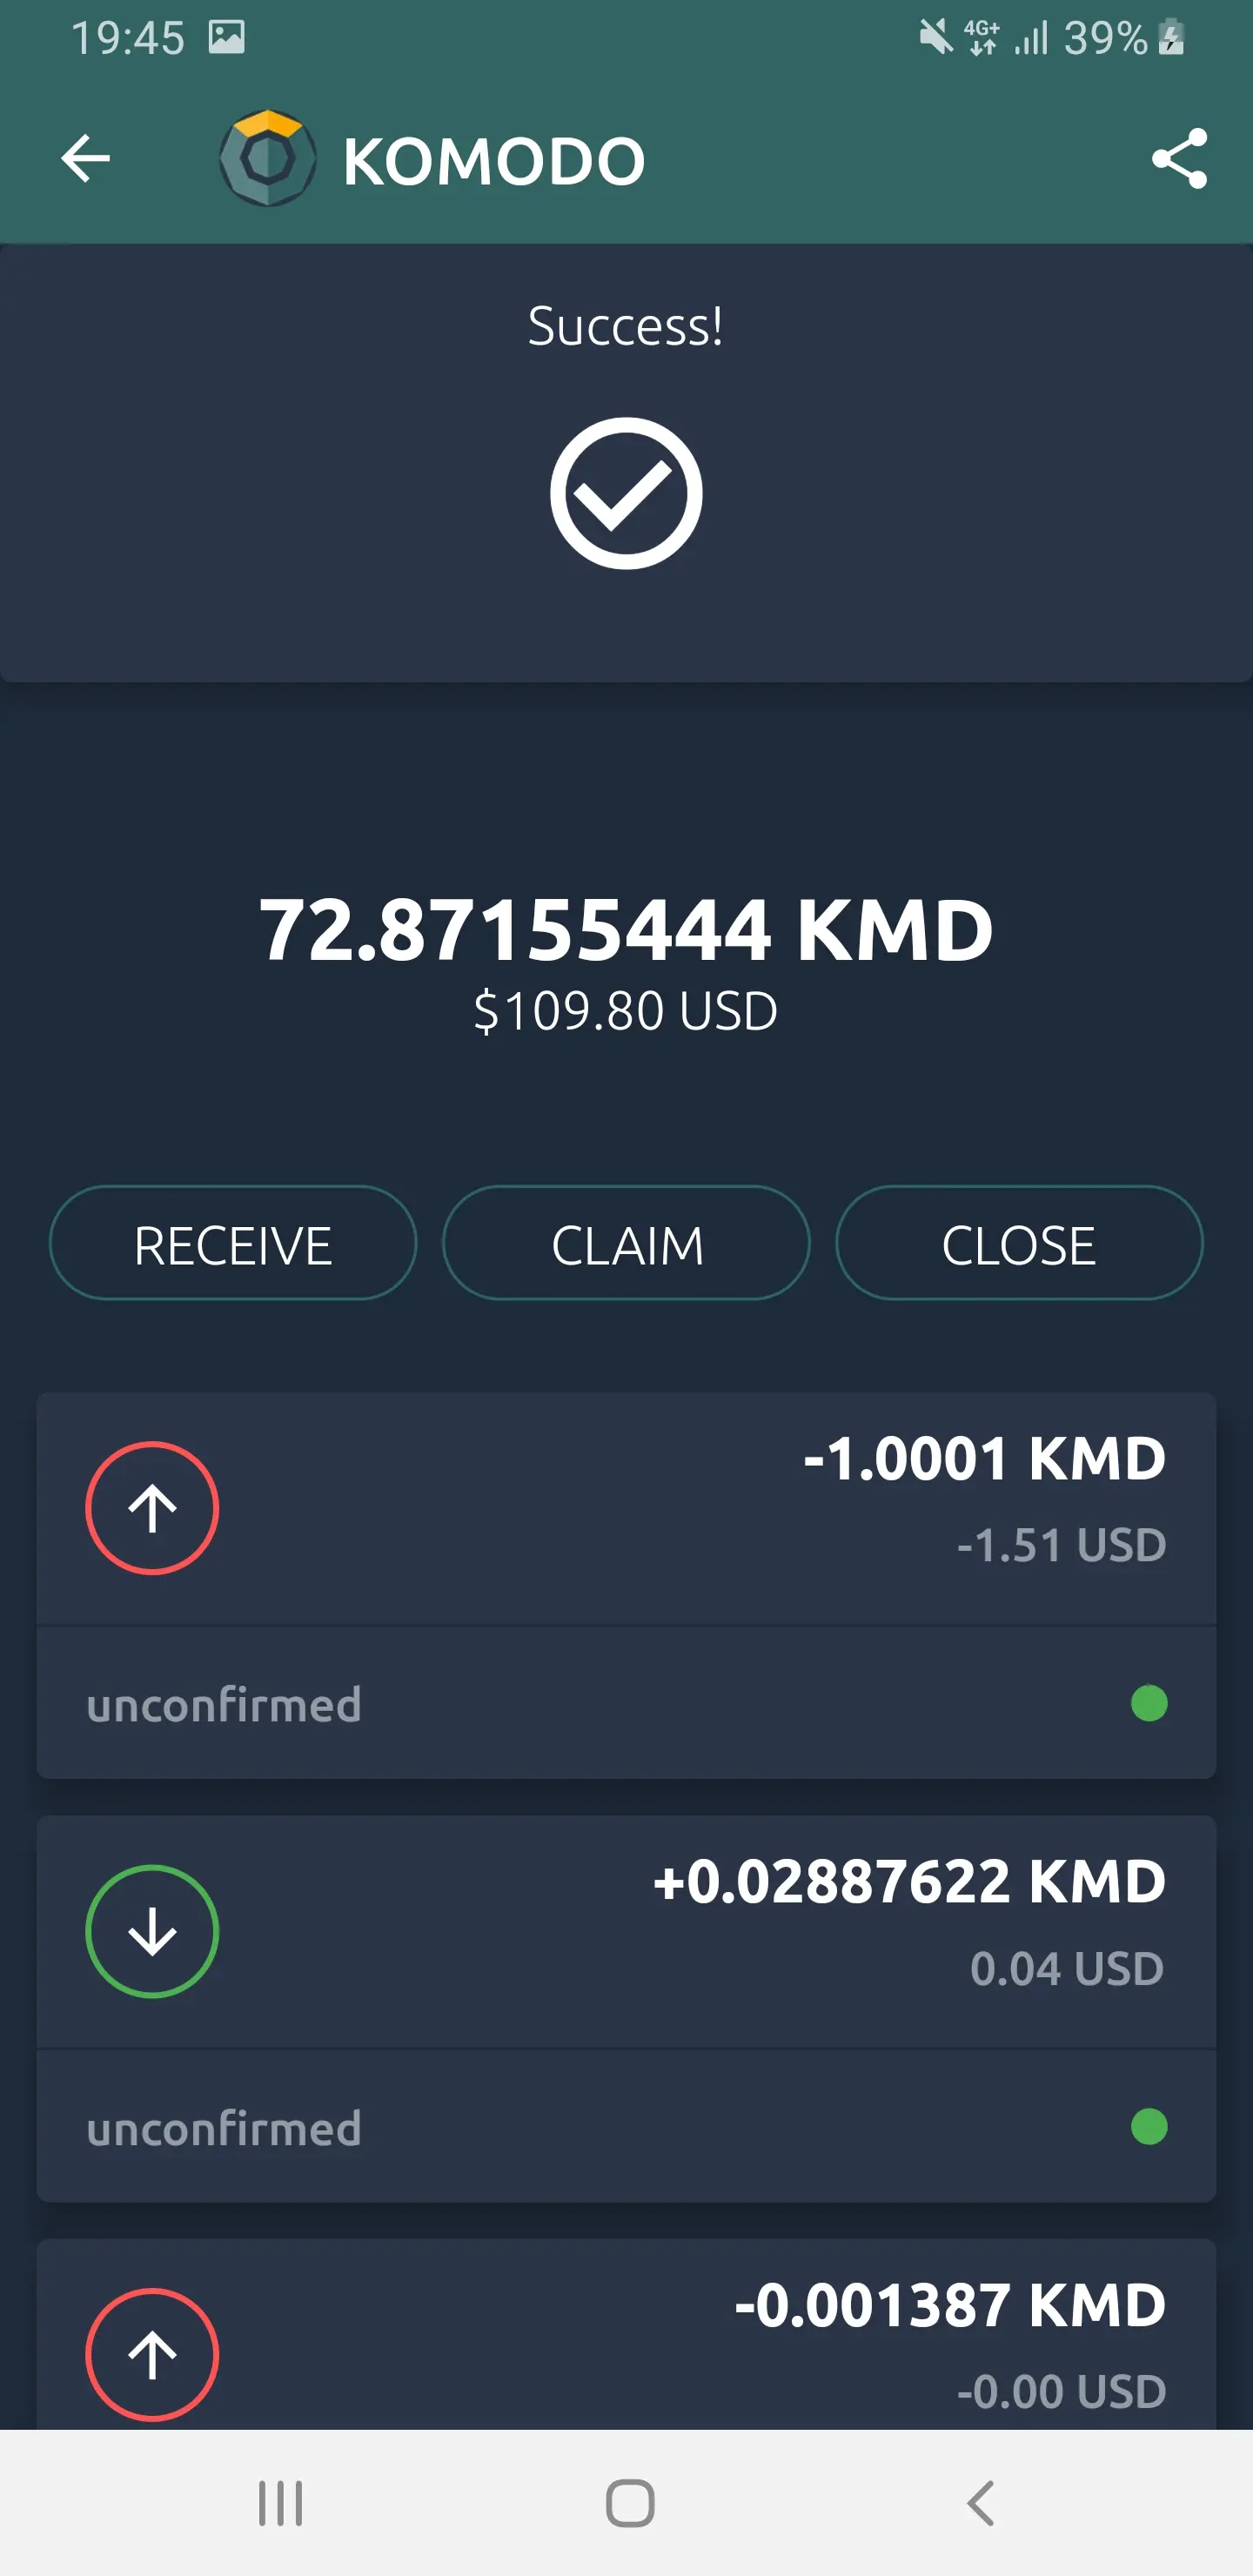  How to Withdraw or Send Funds Using Komodo Mobile Wallet